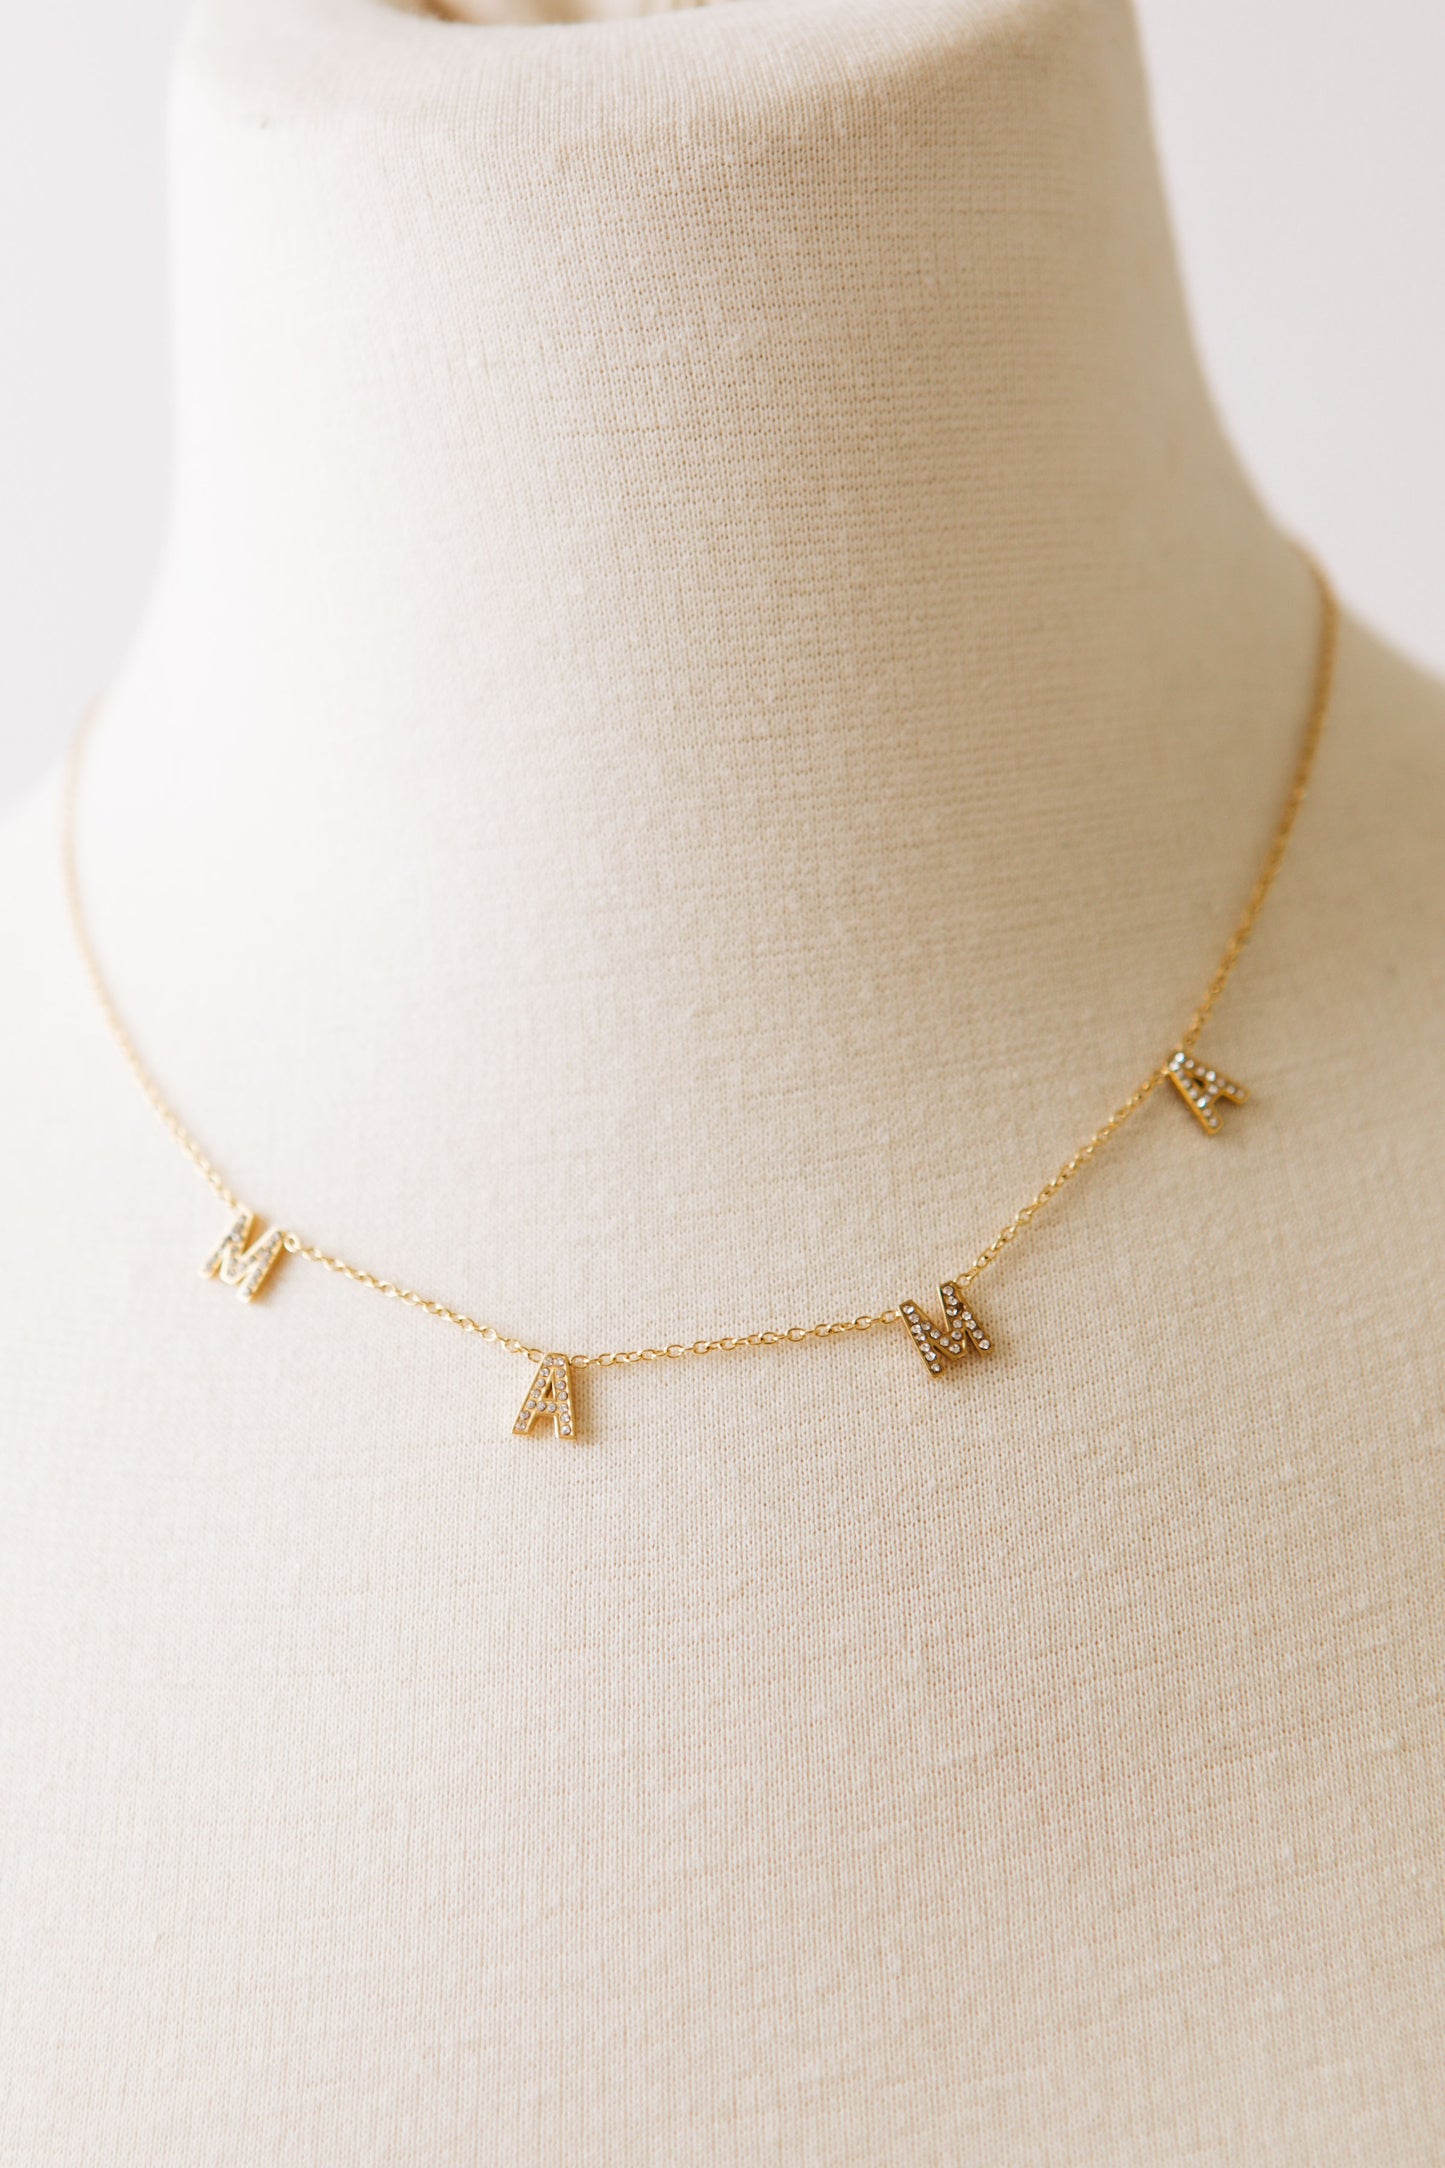 Oak & Ivy - Mama with CZ Stones Necklace